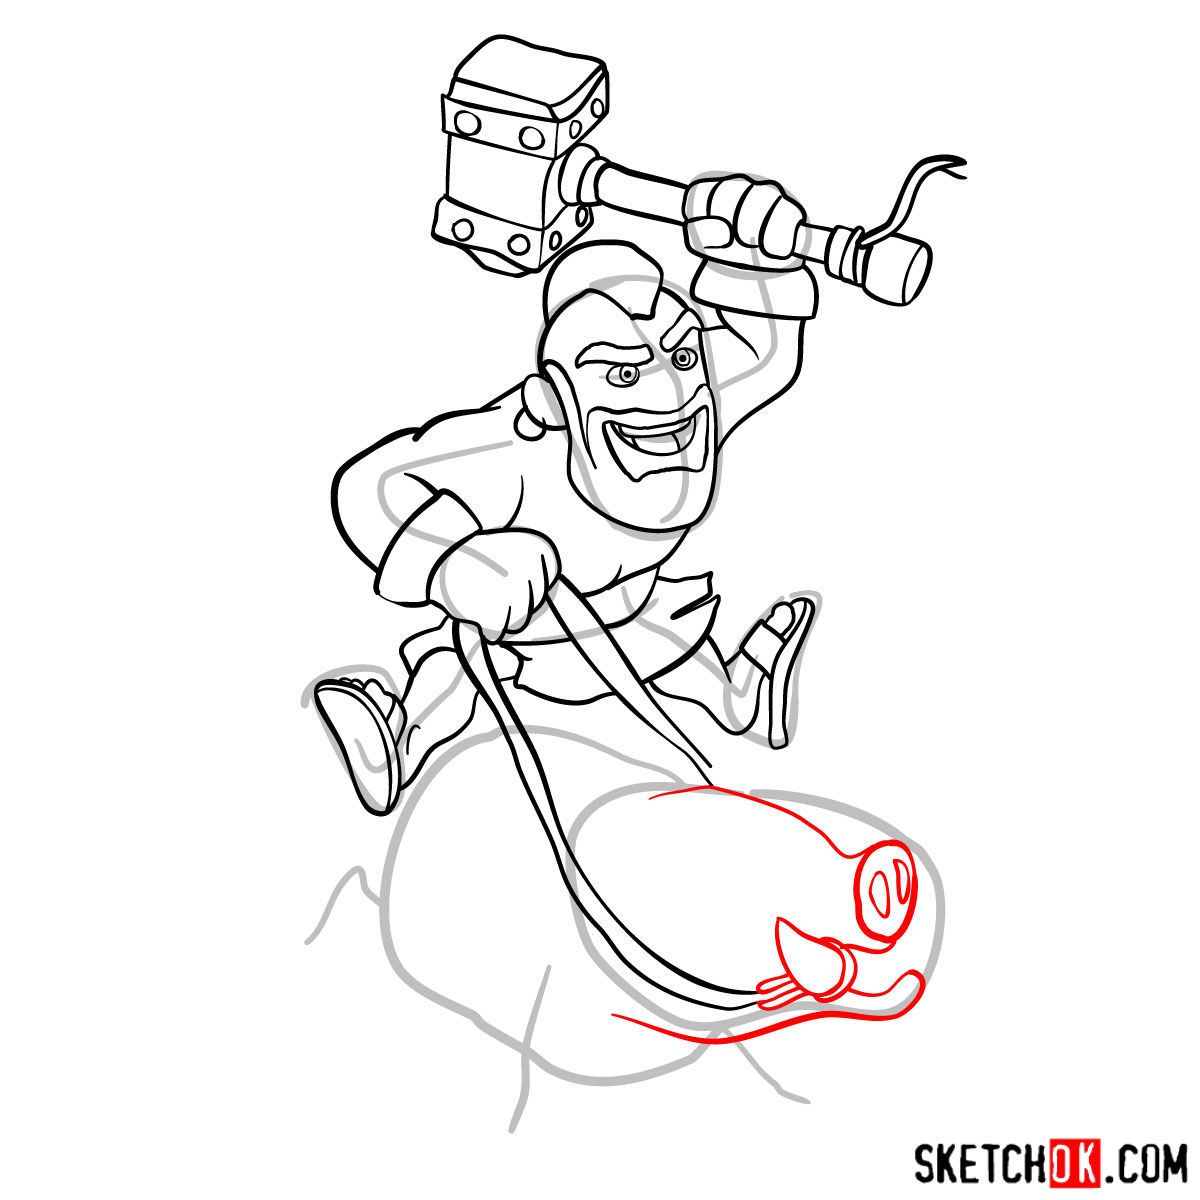 How to draw hog rider